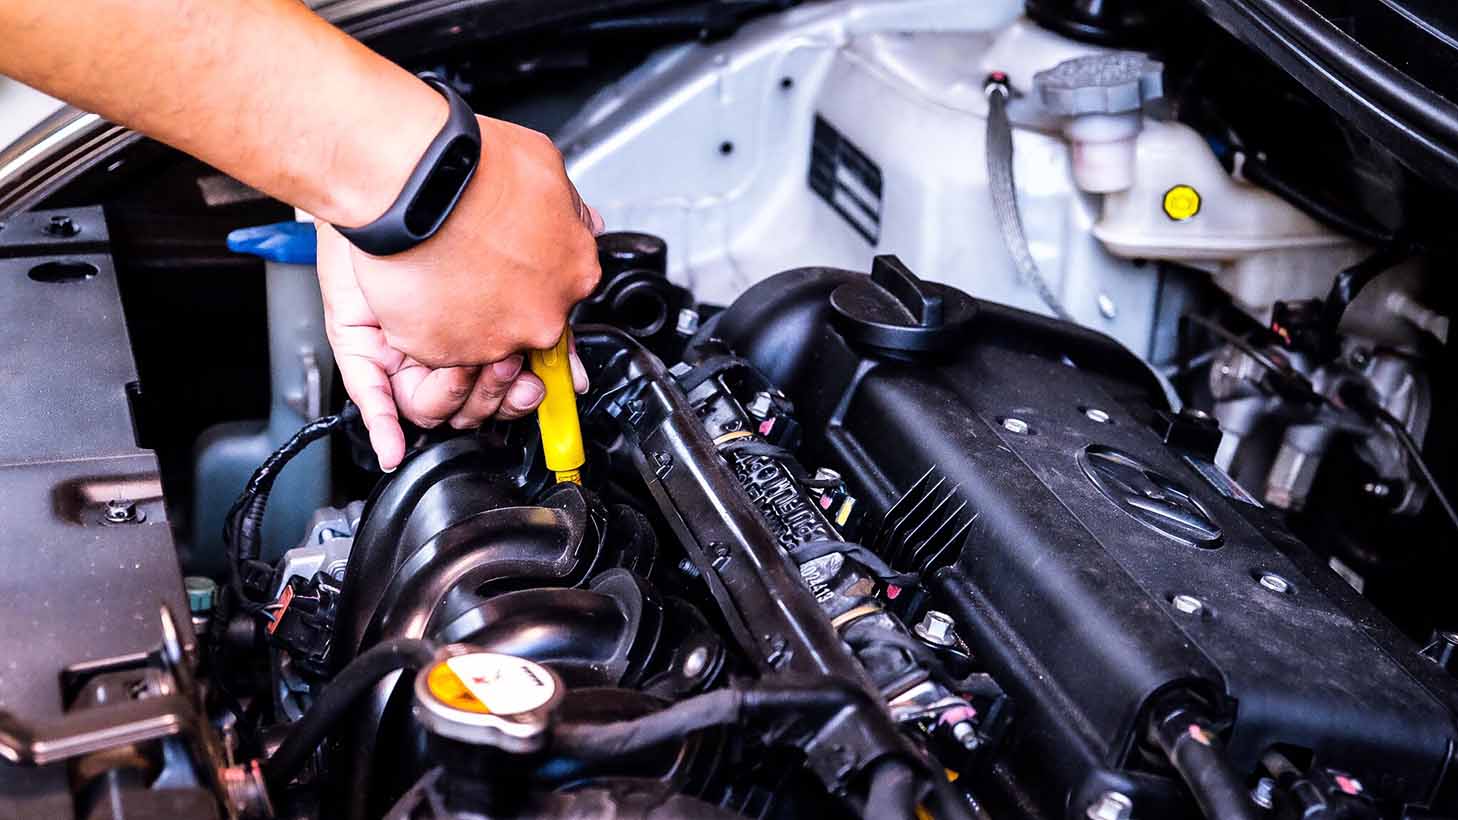 Car tuning guide: everything you need to know